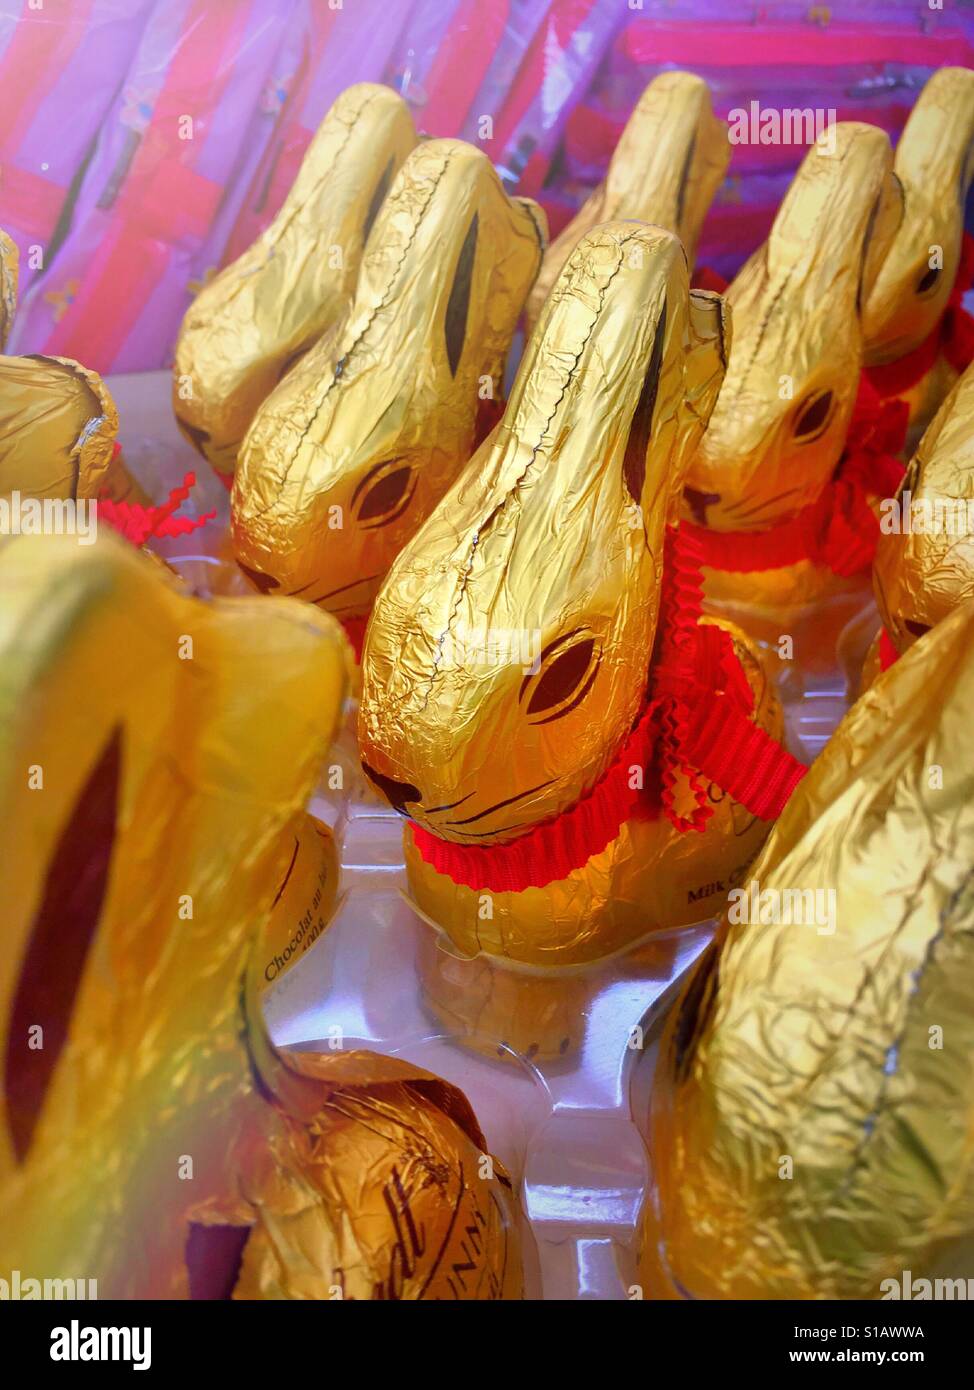 Chocolate foil wrapped bunny display for Easter, USA Stock Photo